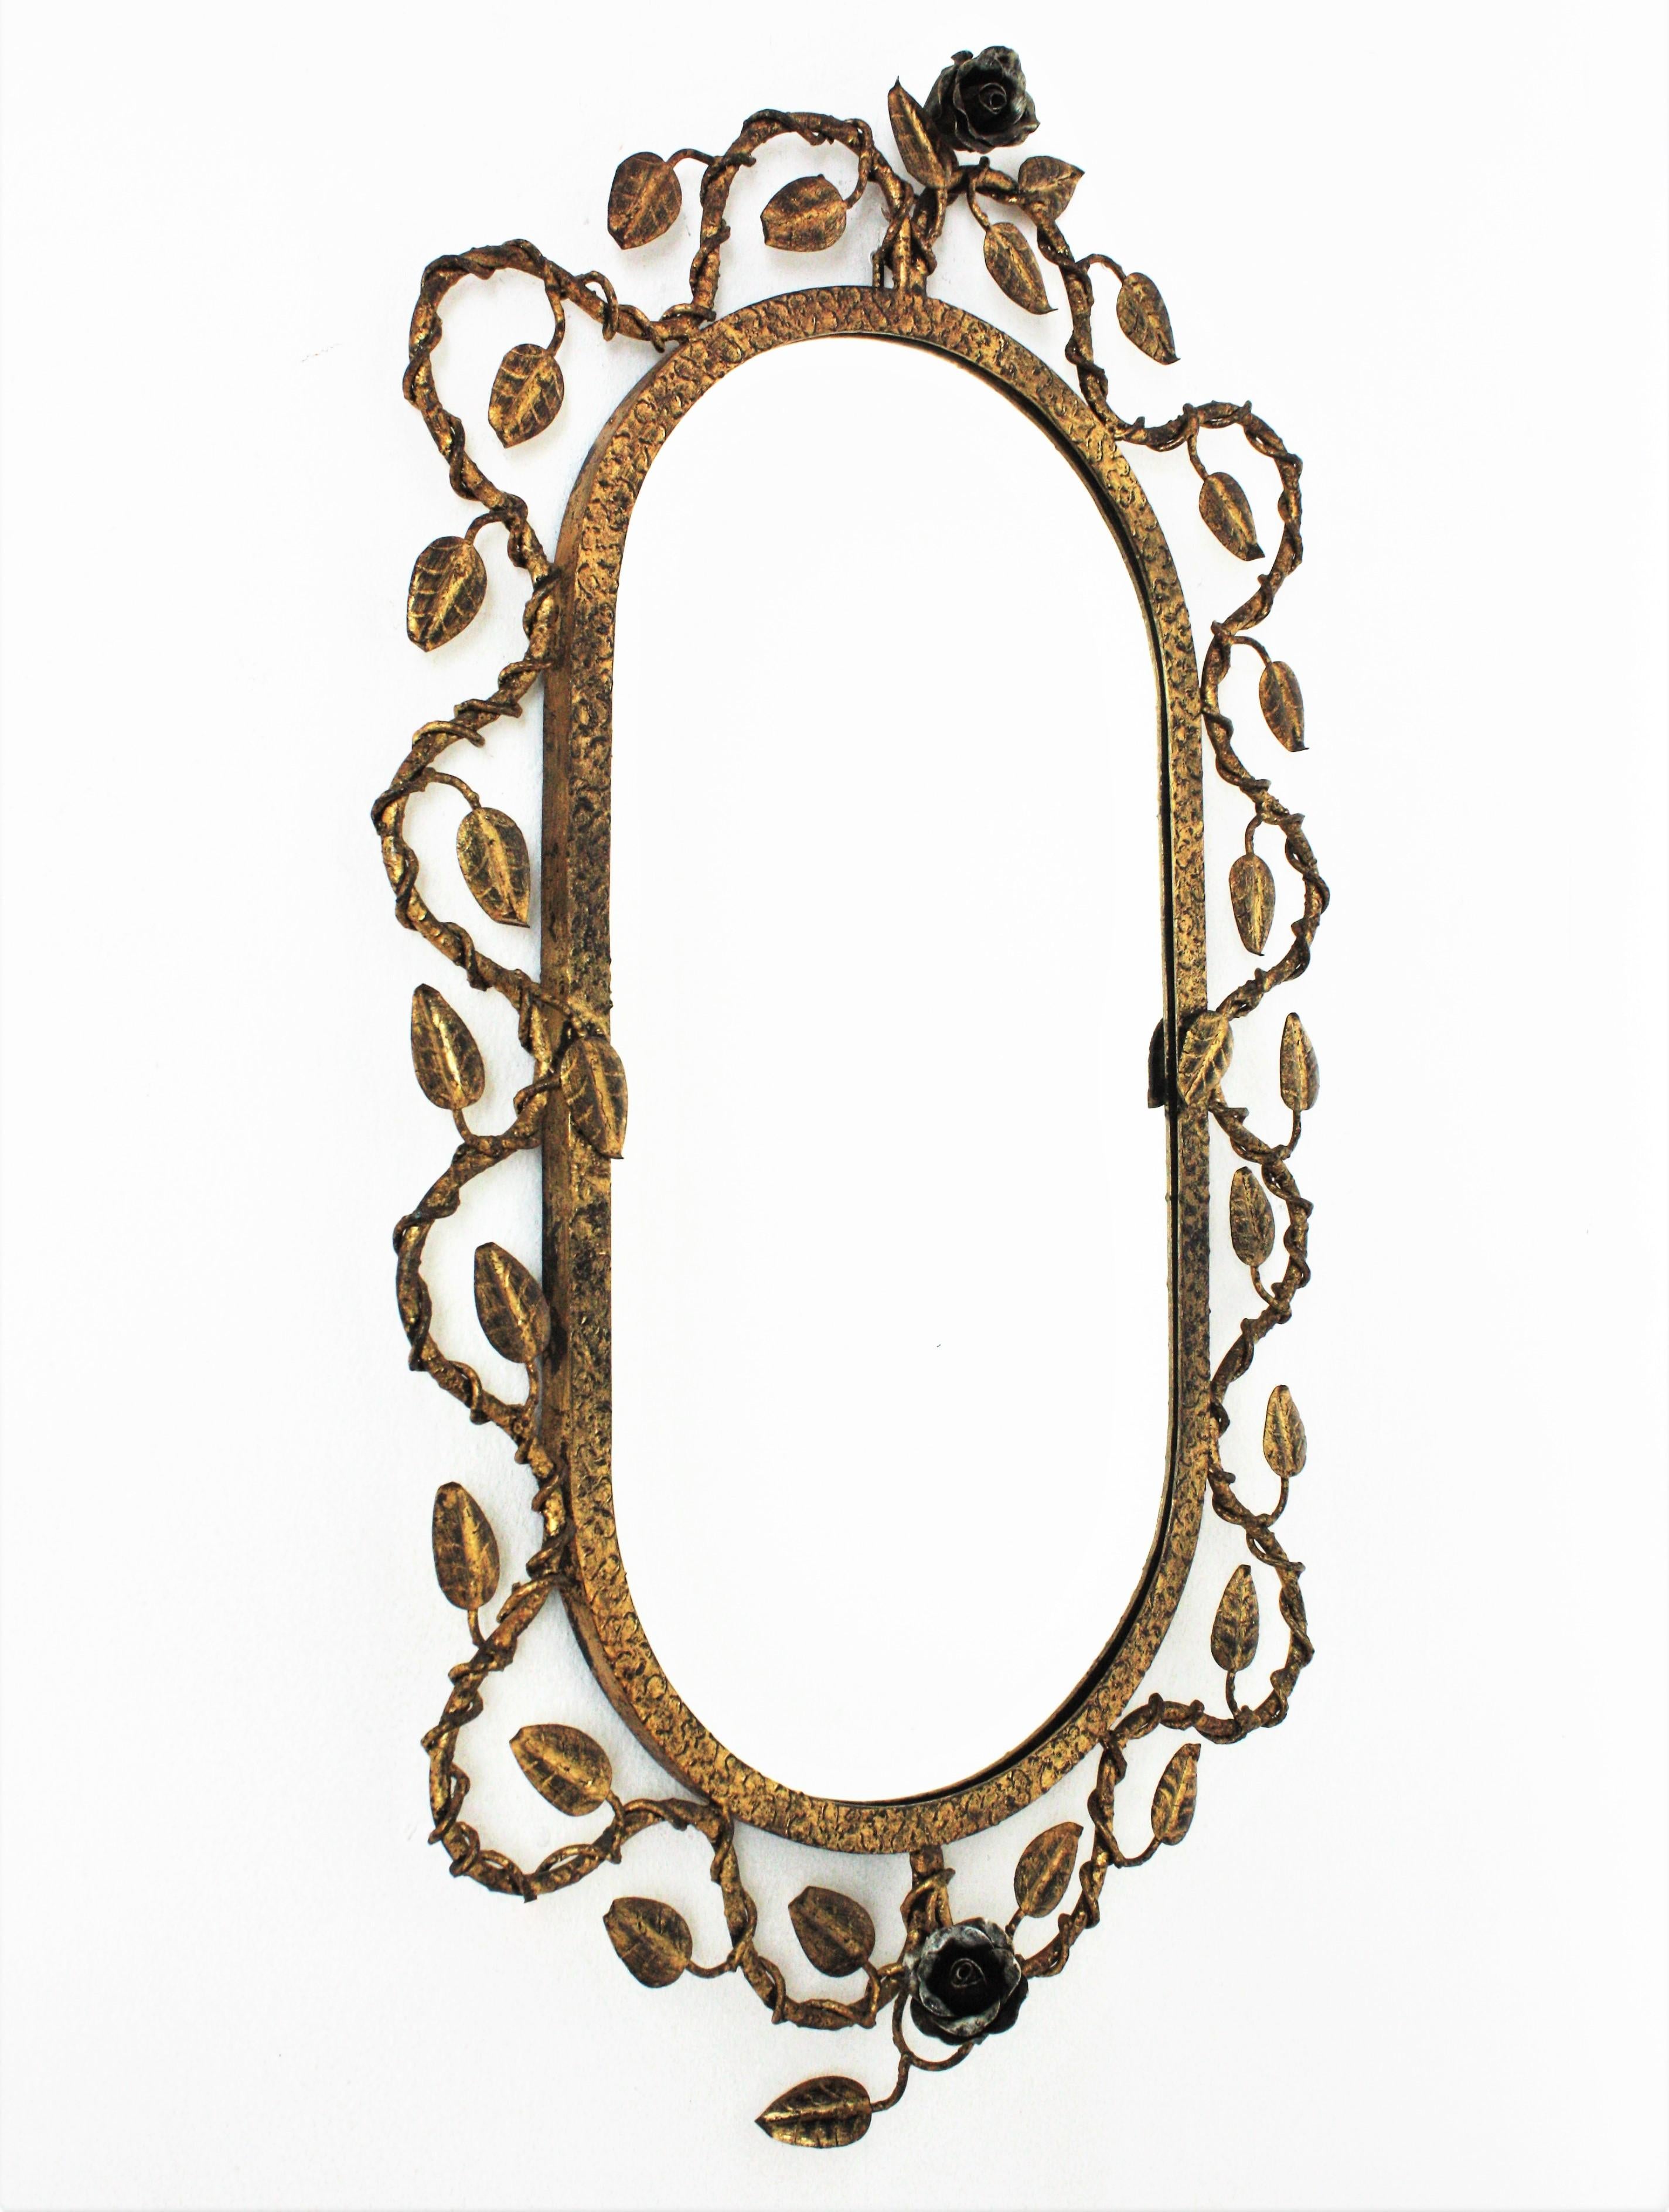 Hollywood Regency Oval Mirror in Gilt Iron with Foliage Floral Motifs